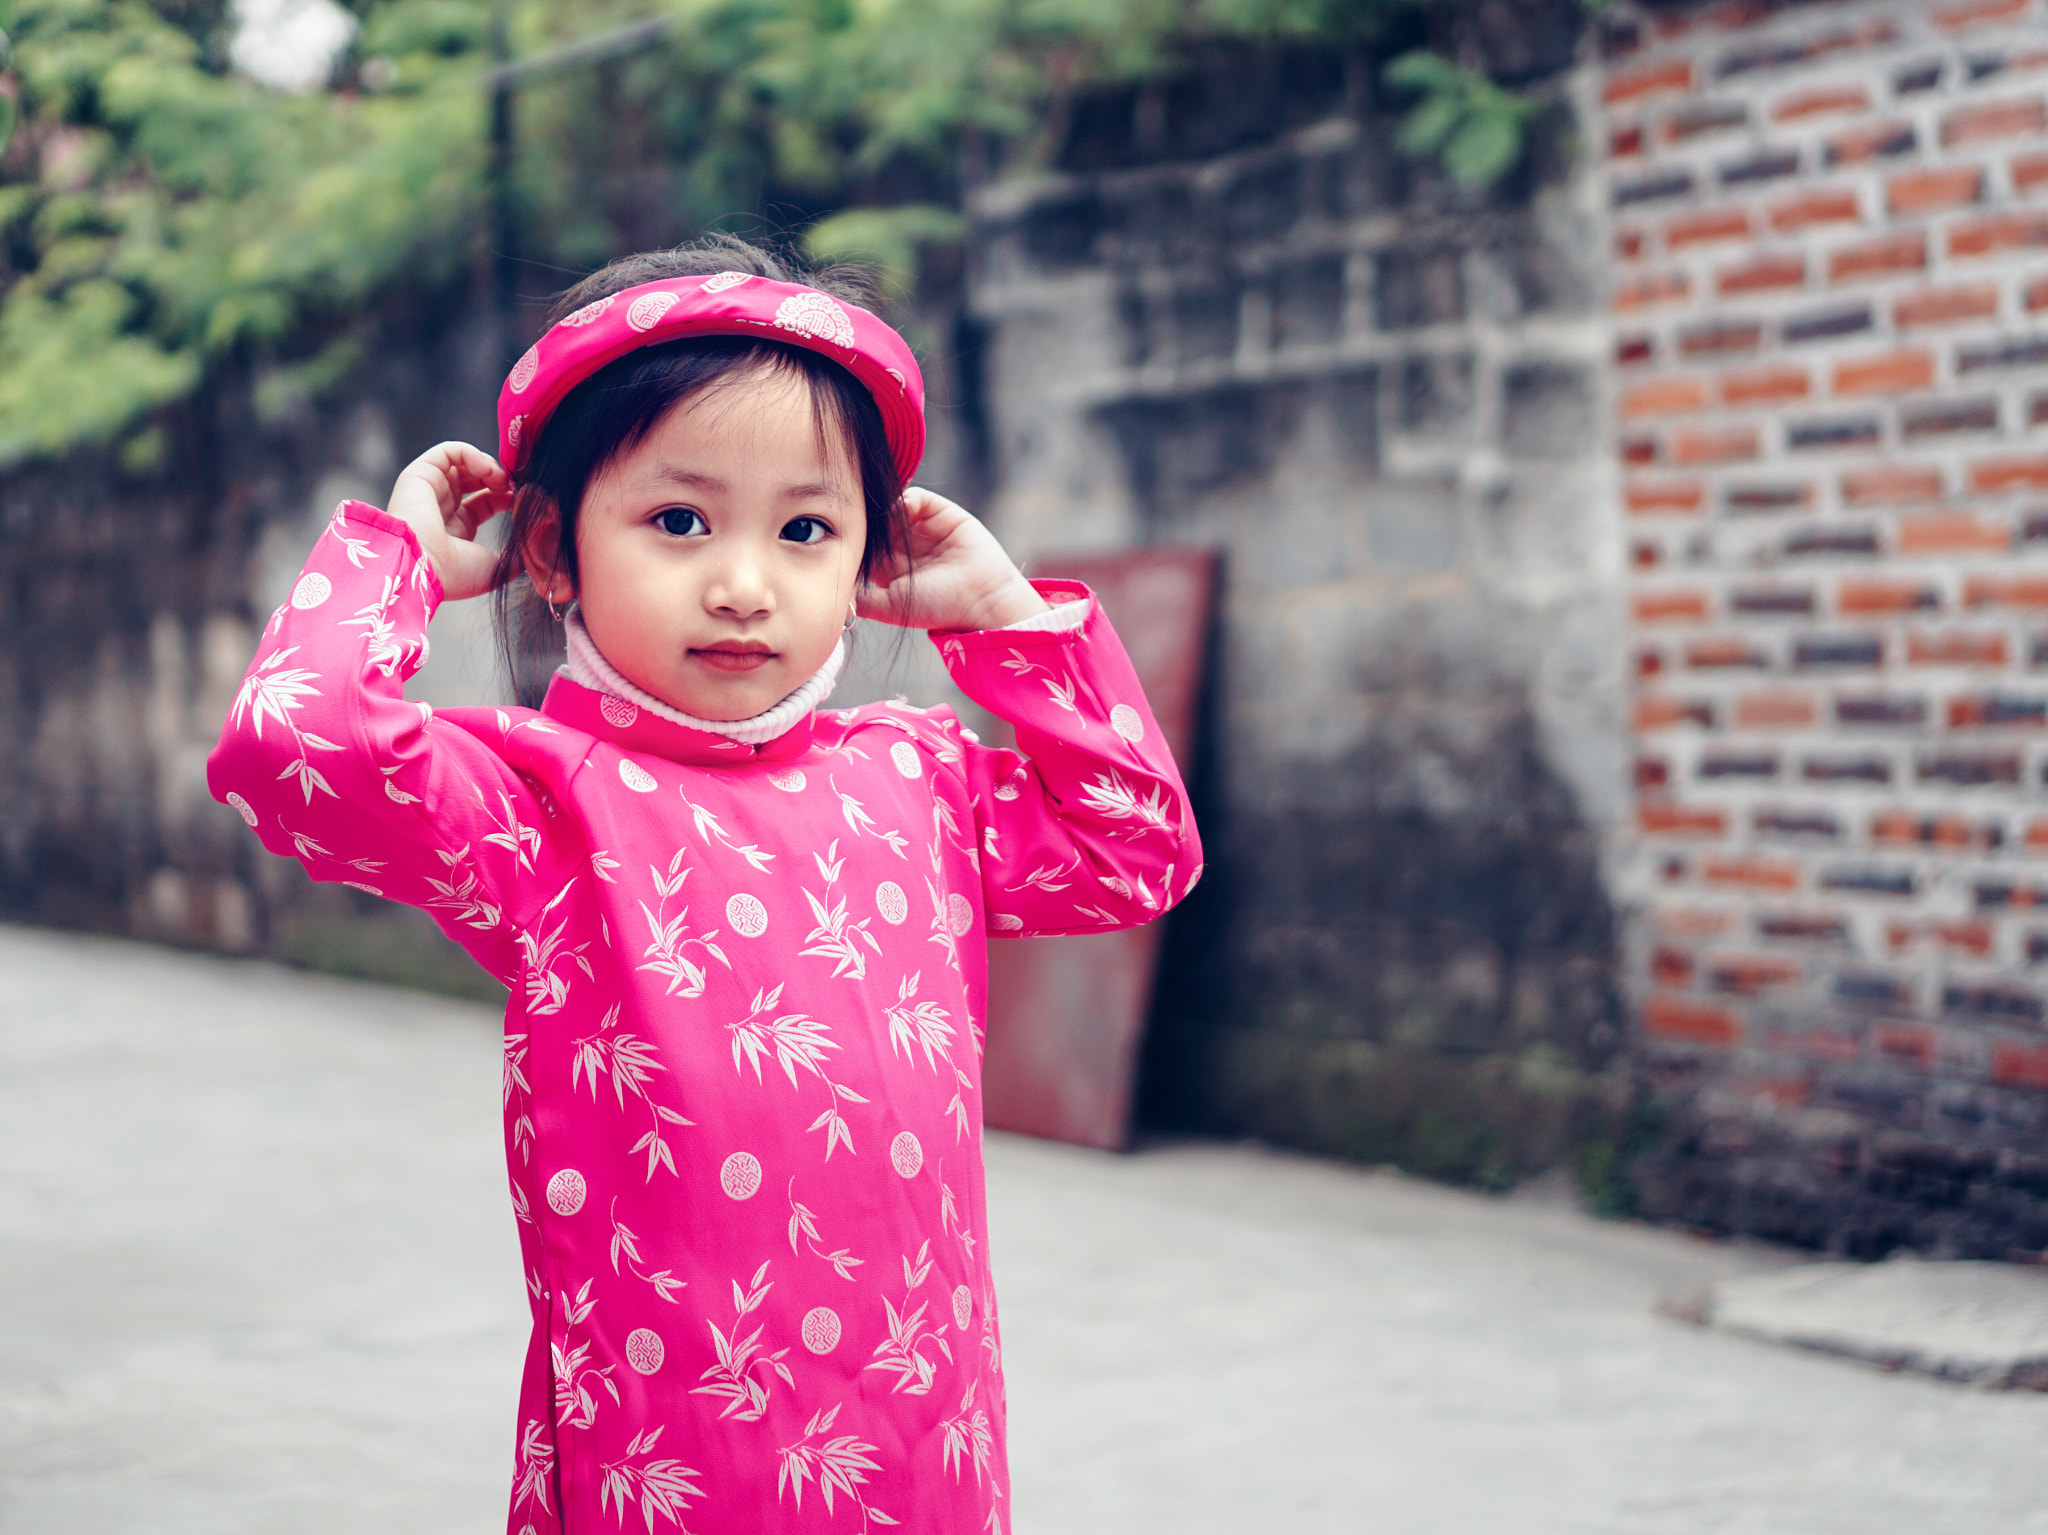 Sony a6000 sample photo. My niece in tradditional dress "ao dai". photography